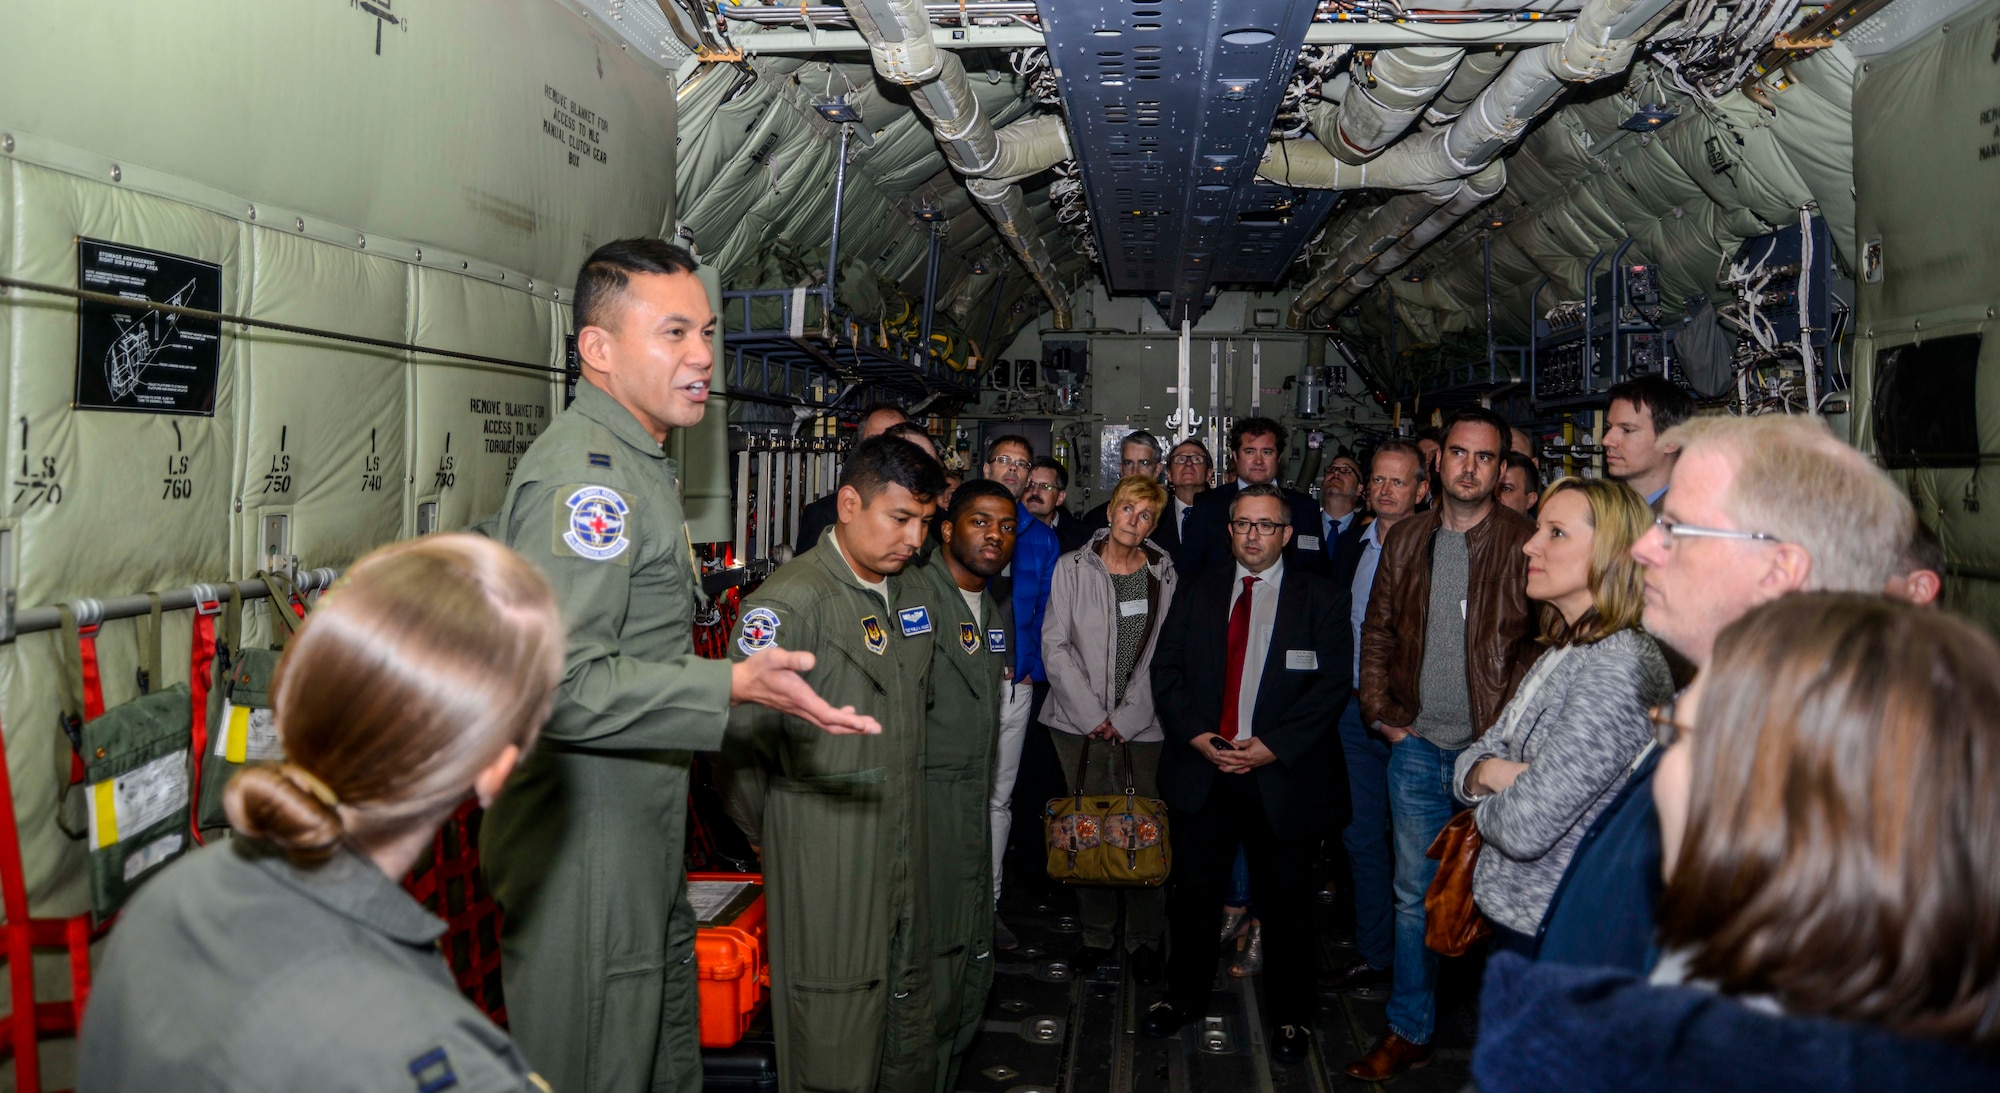 Capt. Randolph Matias, 86th Aeromedical Evacuation Squadron flight nurse, briefs medical providers during a tour on Ramstein Air Base, Germany, April 27, 2017. The biennial tour helps medical providers from the Kaiserslautern Military Community see how the care they provide to military members and their families plays not only into the 86th AES mission, but the overall 86th Medical Group mission. (U.S. Air Force photo/Staff Sgt. Timothy Moore)